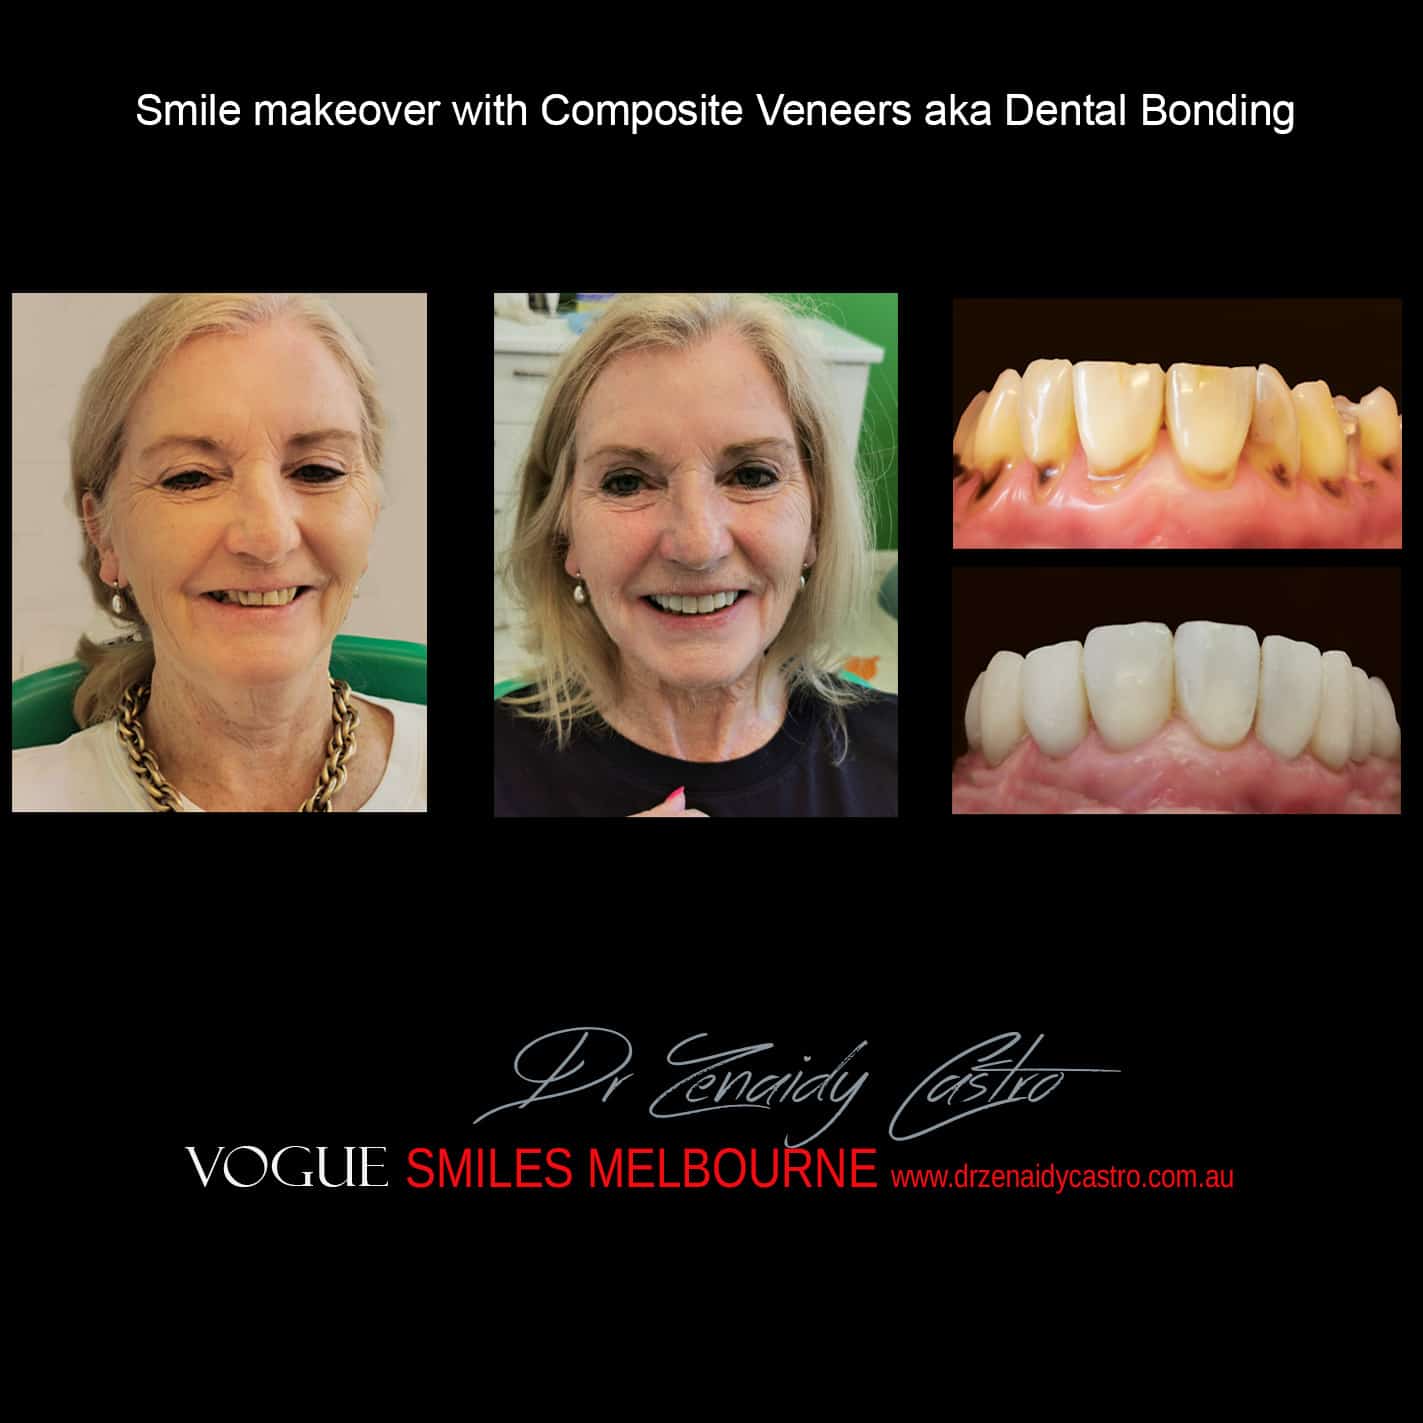 HOW MUCH DOES THE Cosmetic Dental Bonding or Composite Veneers COST IN MELBOURNE, Cost of Cosmetic Dental Bonding or Composite Veneers in Melbourne CBD?